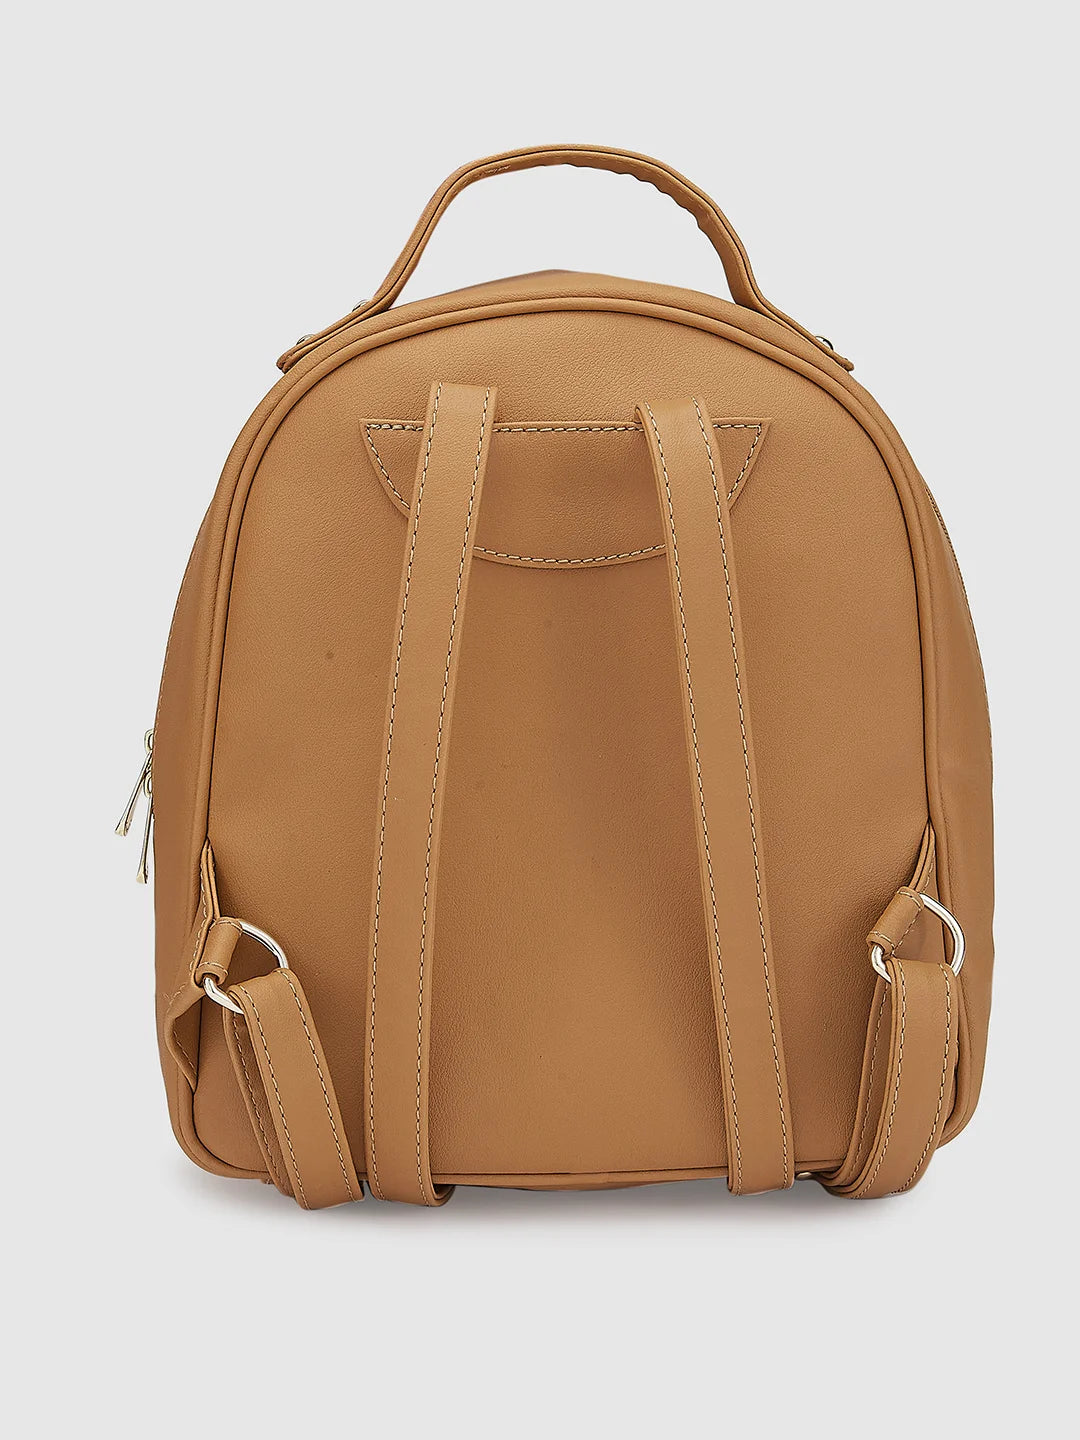 Cole Haan Triboro Leather Backpack In New British Tan | ModeSens